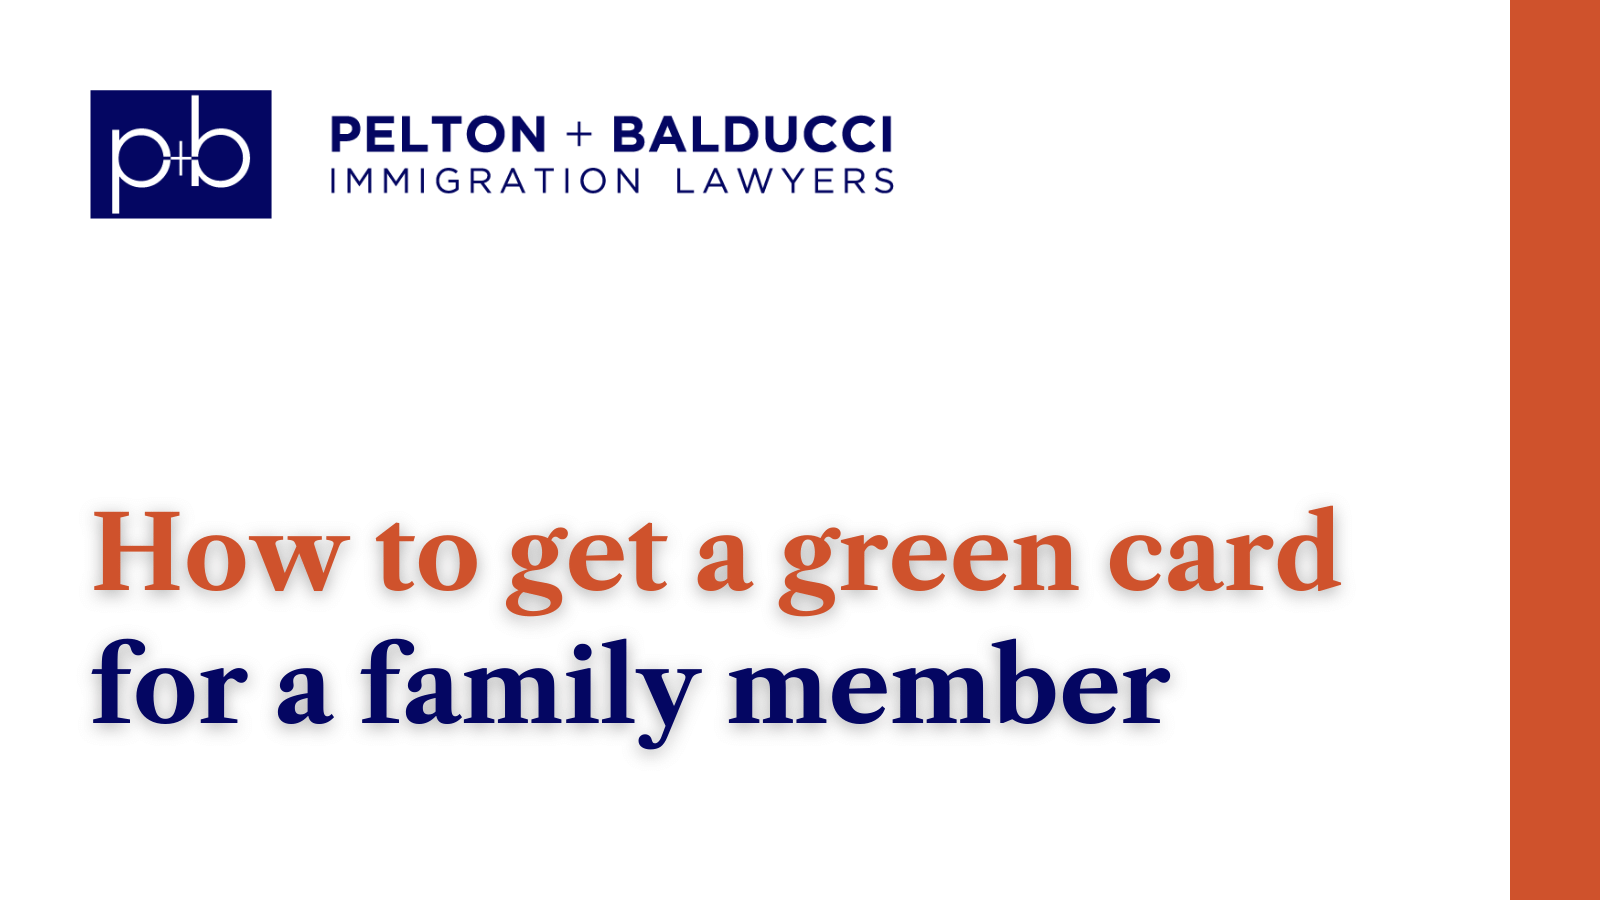 How to get a green card for a family member